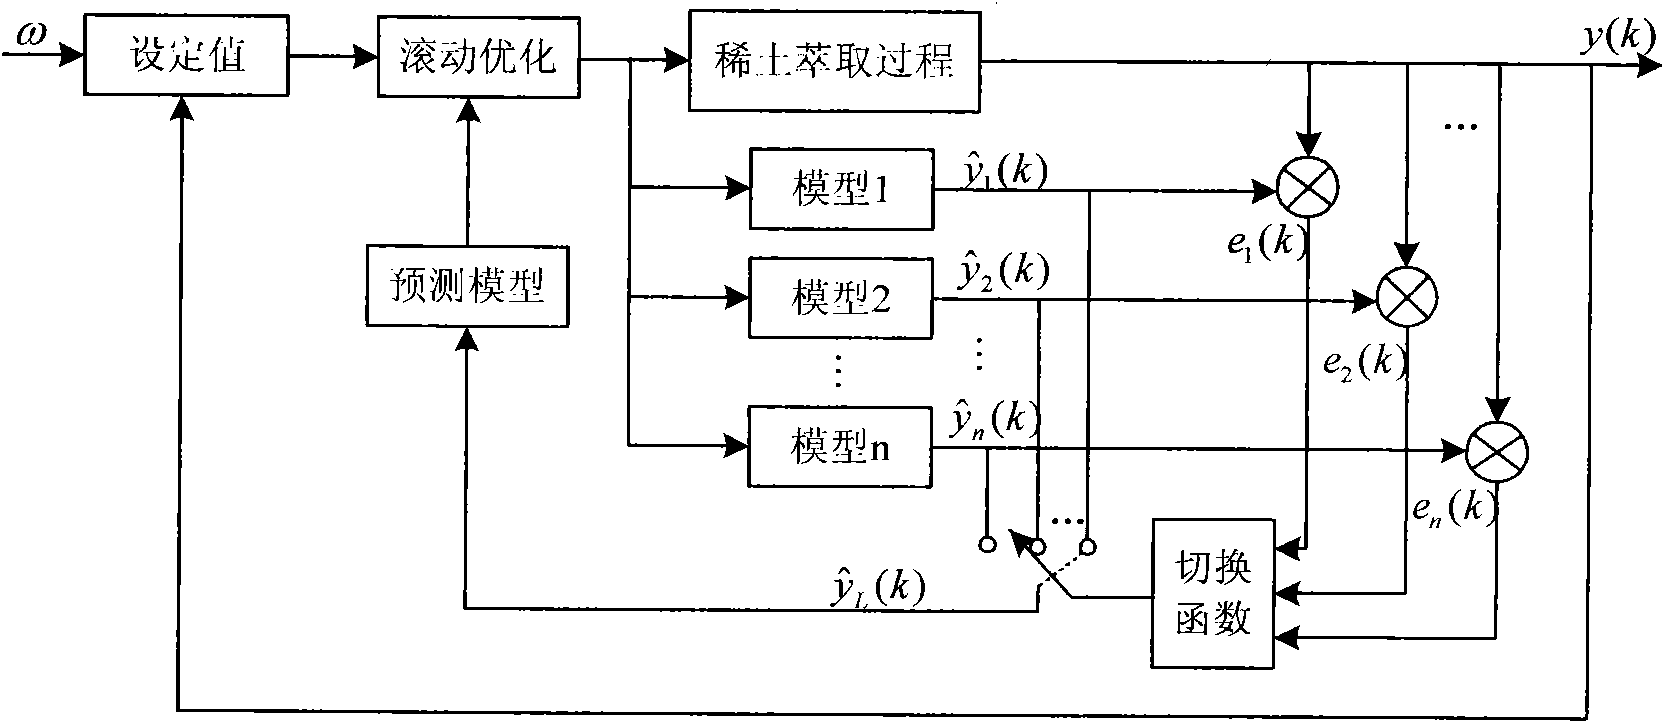 Multi-model predictive control method for component content in process of extracting rare earth